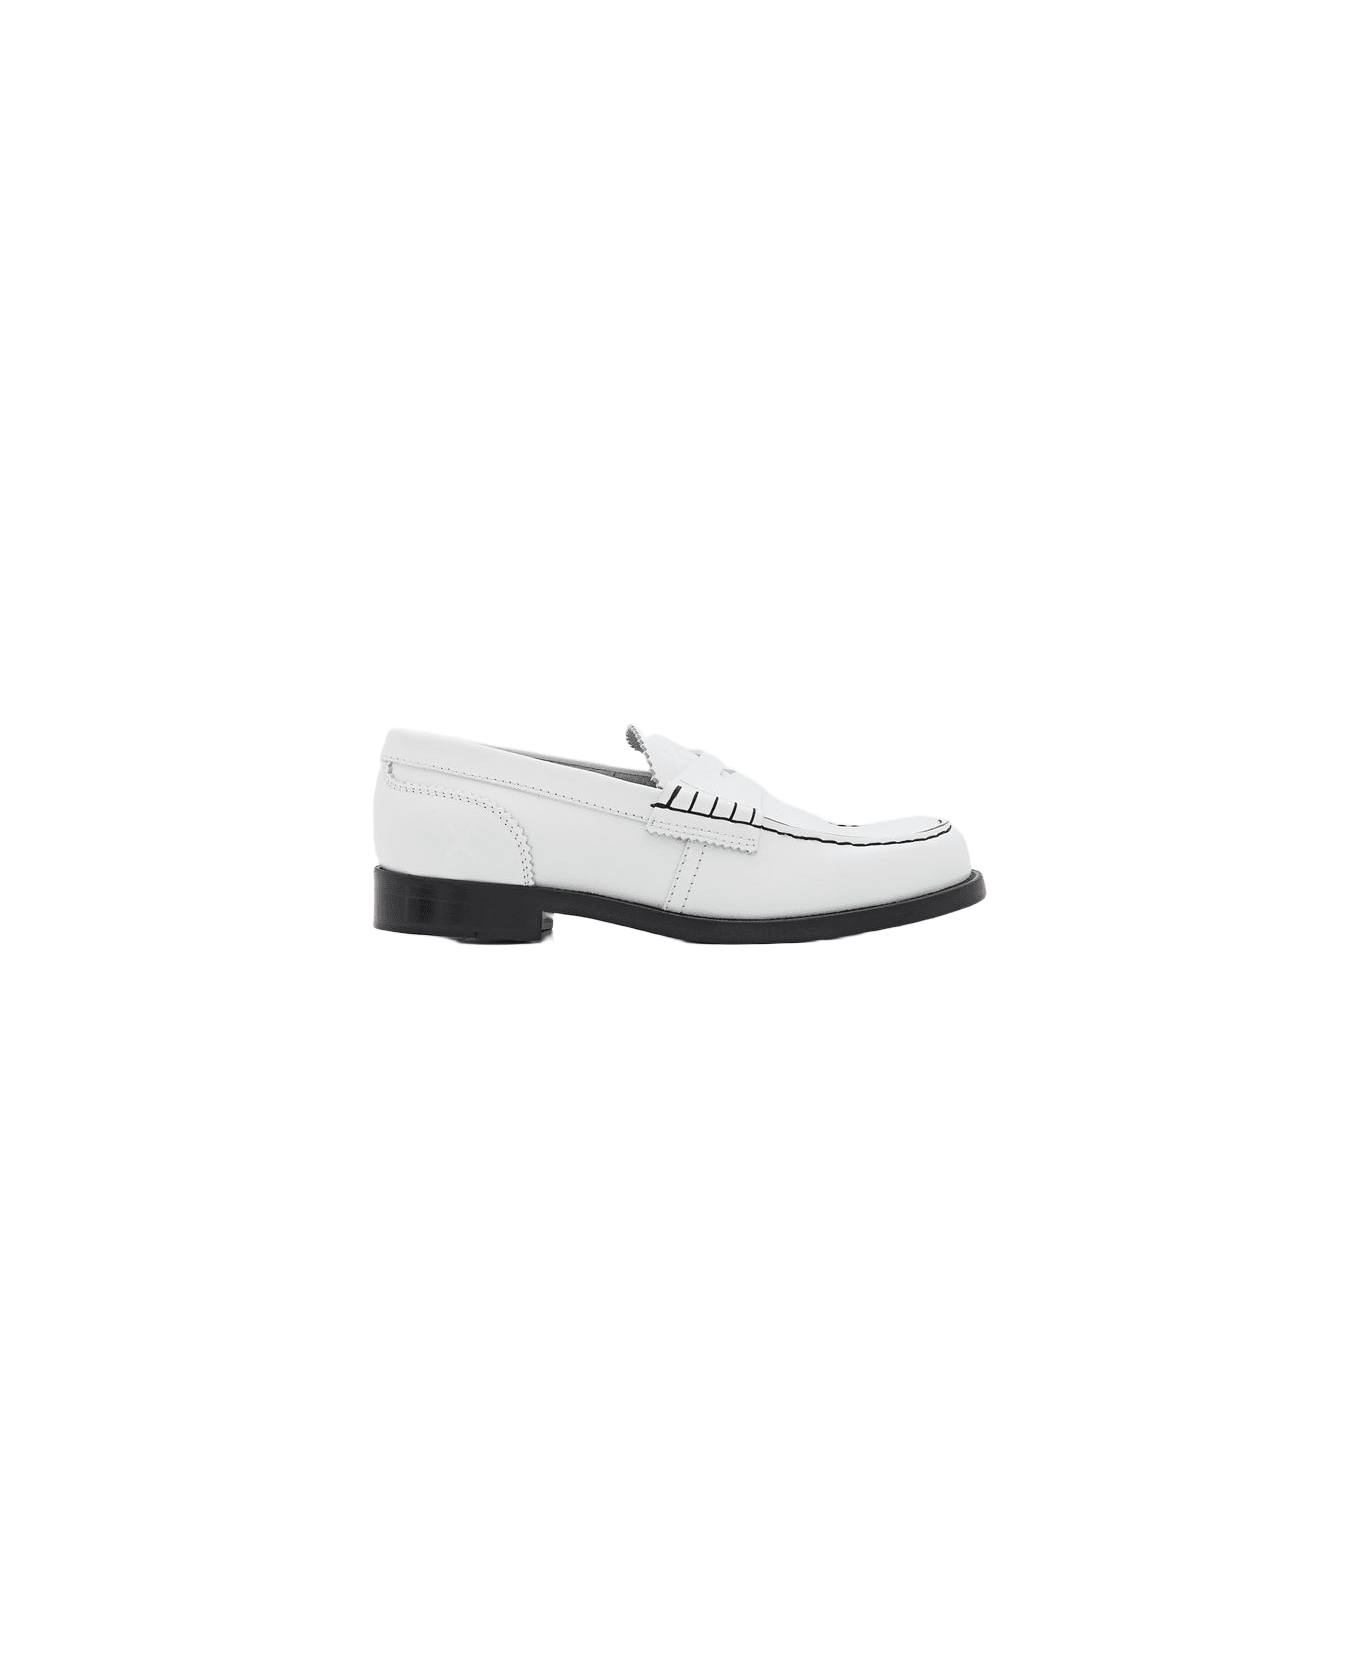 College Leather Moccassin - White フラットシューズ